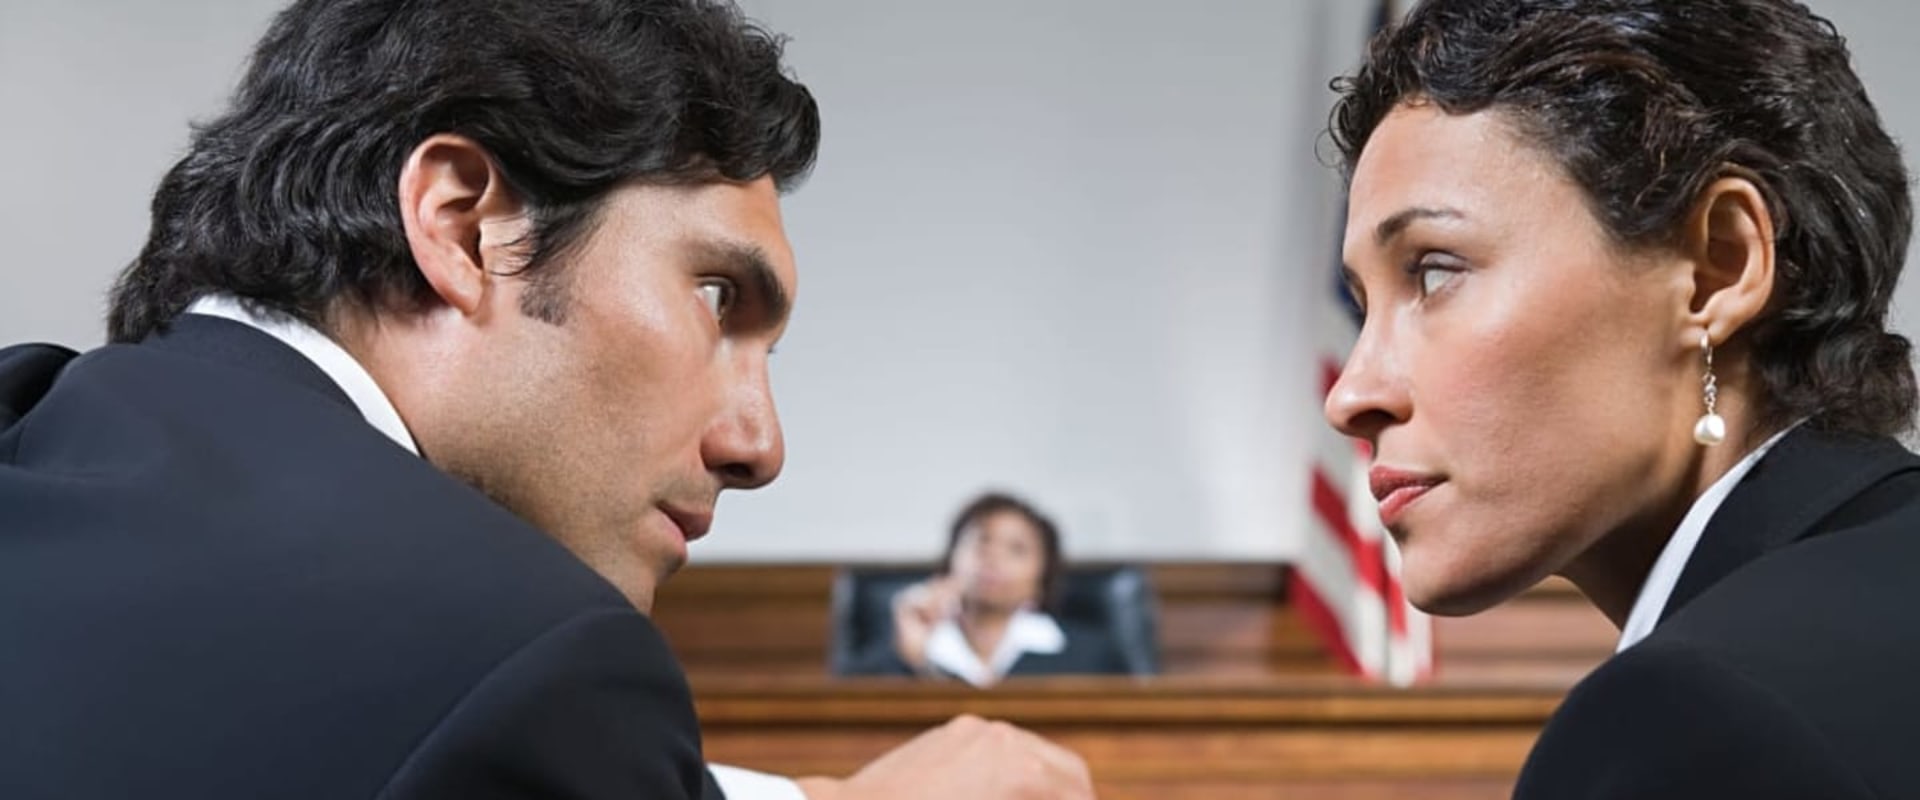 Do criminal defense lawyers know the truth?